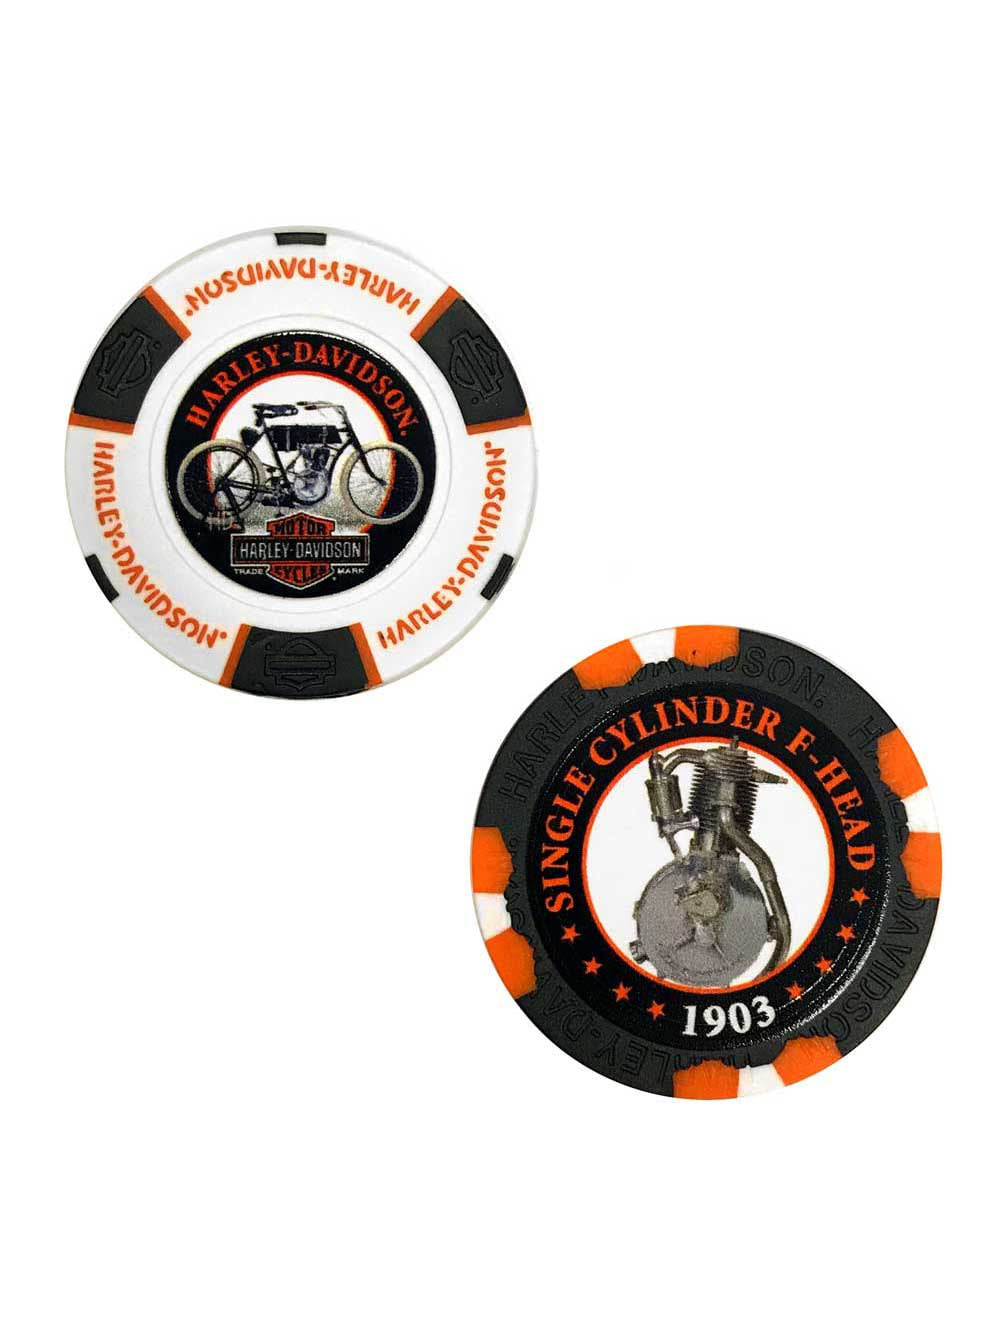 Details about   Harley Davidson Yellow & White Poker Chip from St Kitts 